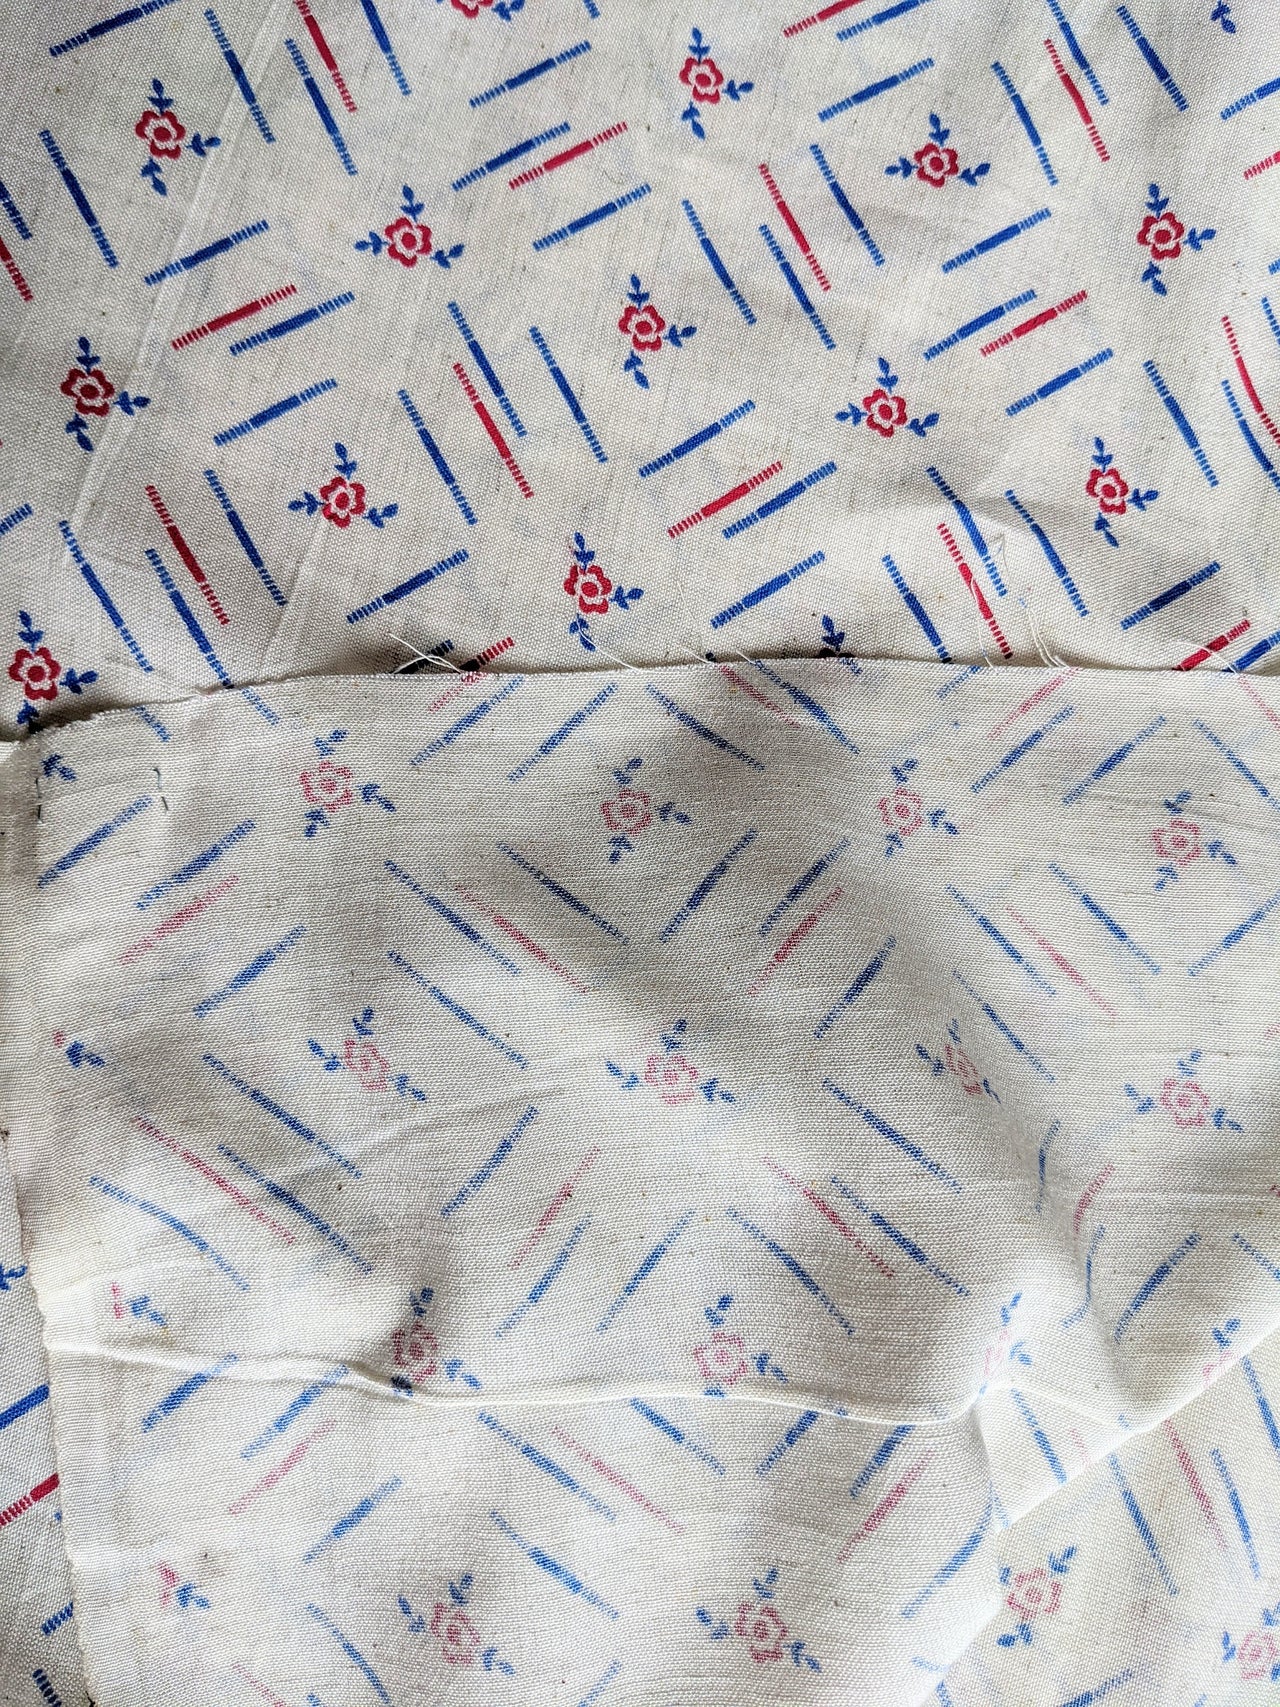 Off White Cotton Fabric In Red and Blue Floral Print, Handloom Fabric, Quilting Fabric